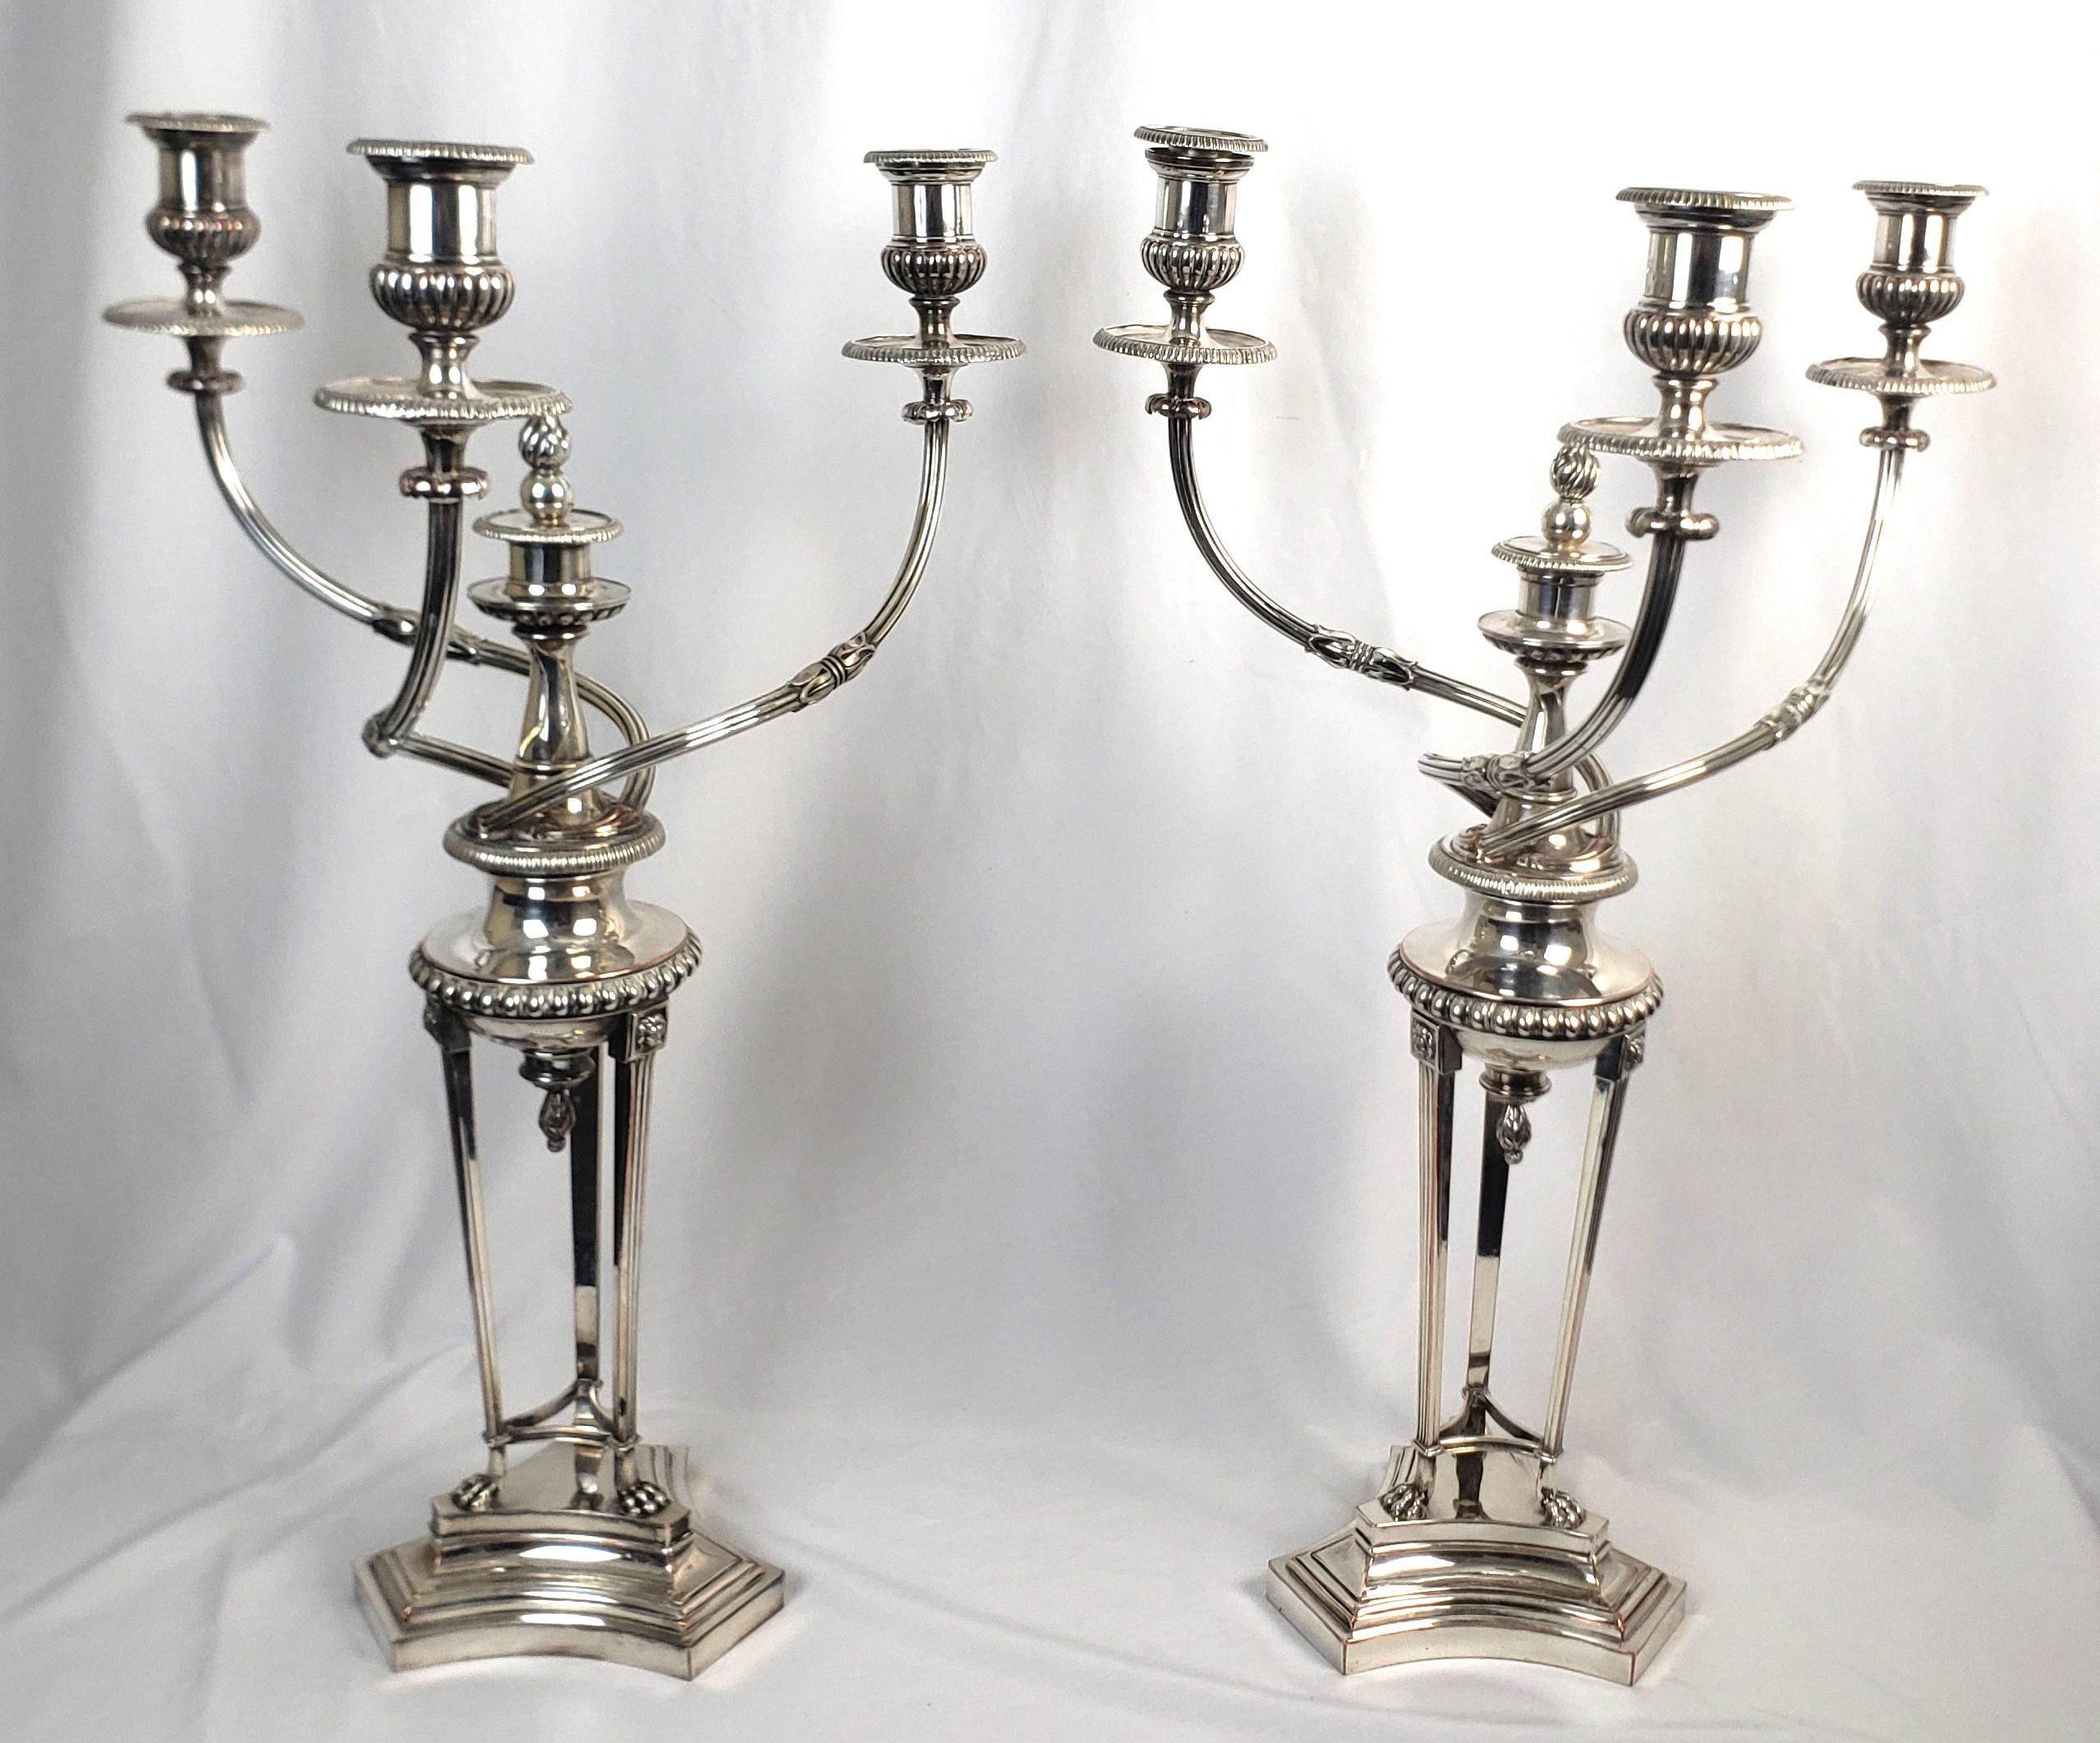 Pair of Huge Antique Matthew Boulton Regency Three Arm Silver Plated Candelabras In Good Condition For Sale In Hamilton, Ontario